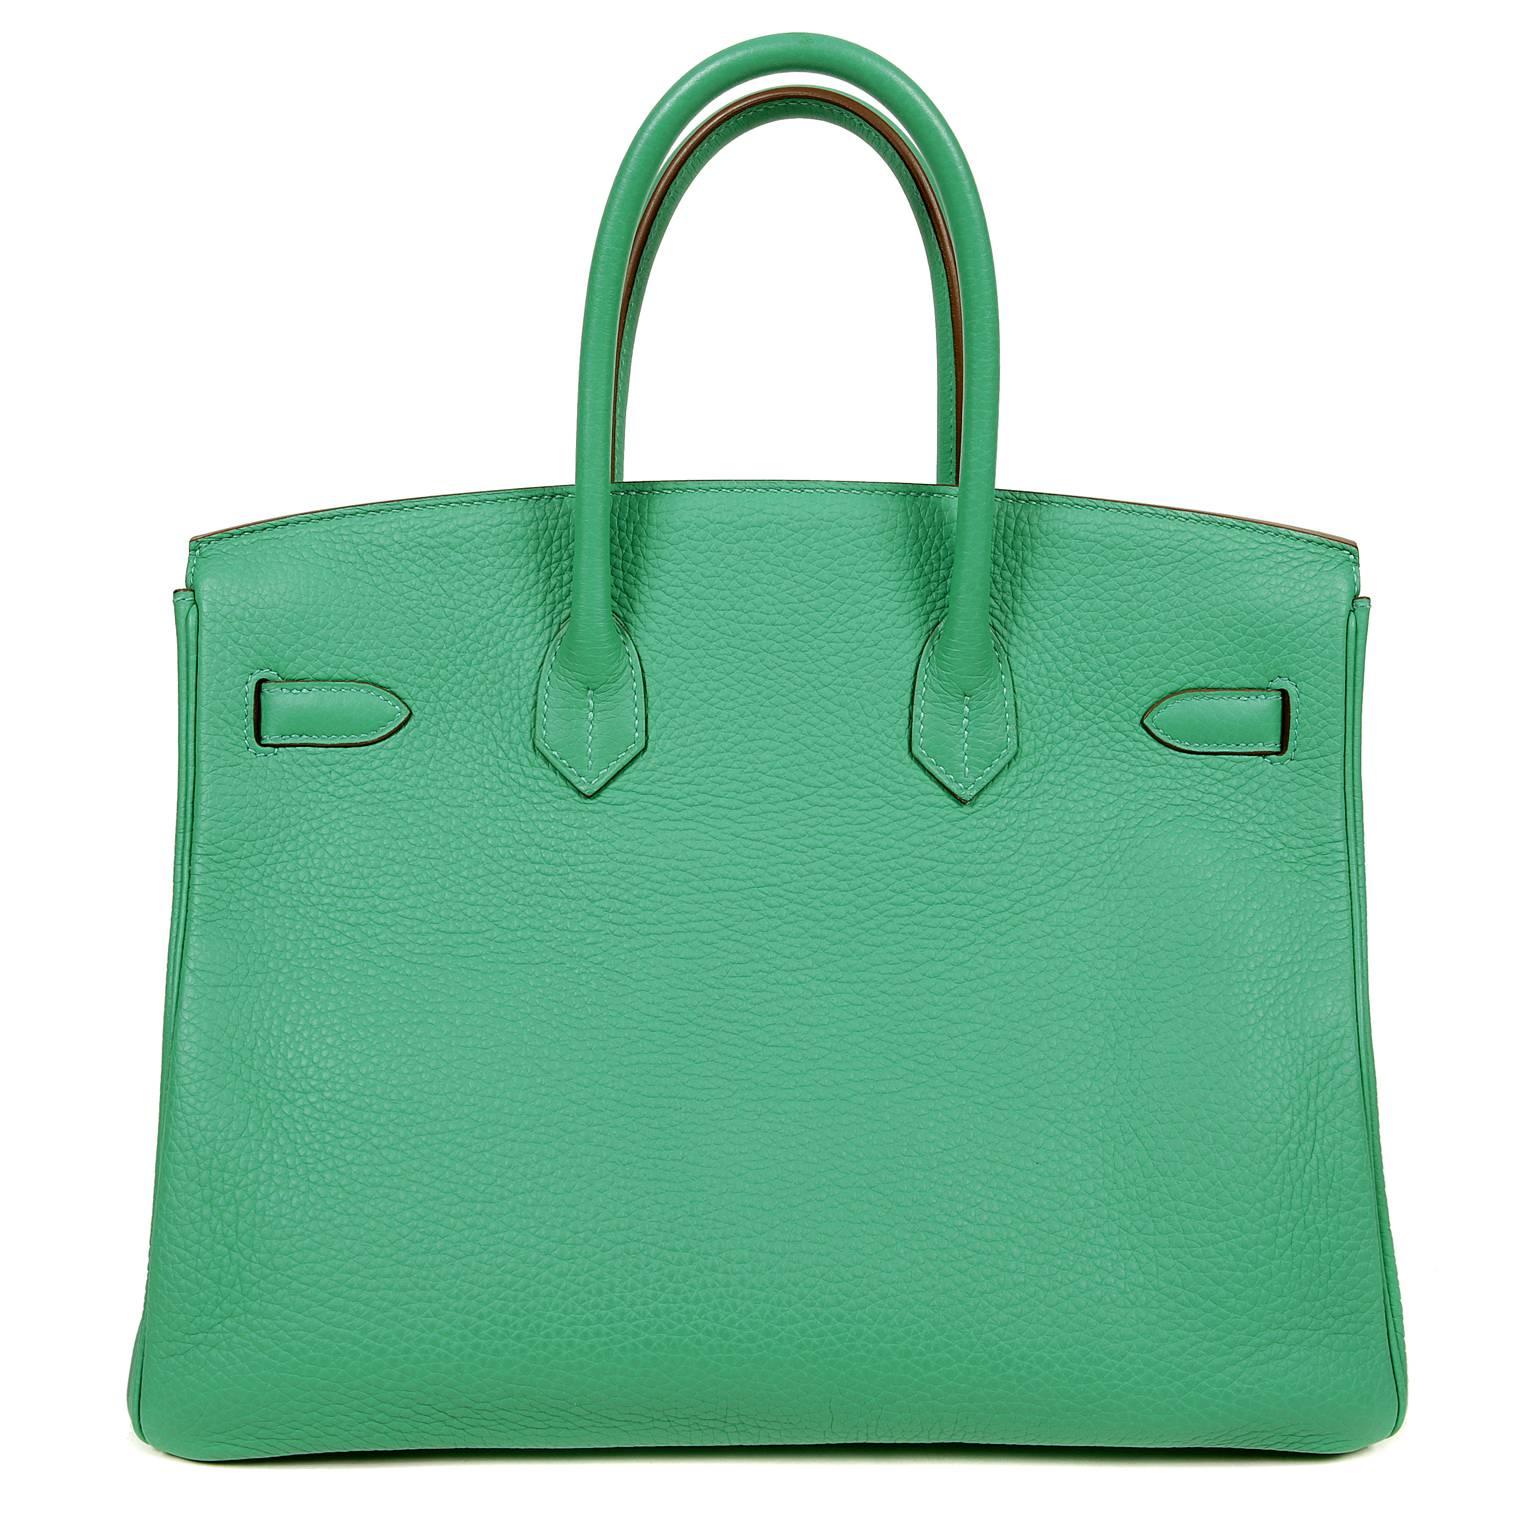  Hermès Menthe Clemence 35 cm Birkin is in pristine unworn condition.  Plastic on hardware.
Hand stitched by skilled craftsmen, wait lists of a year or more are commonplace for the Hermès Birkin. Menthe is a vibrant green- a true POP of color